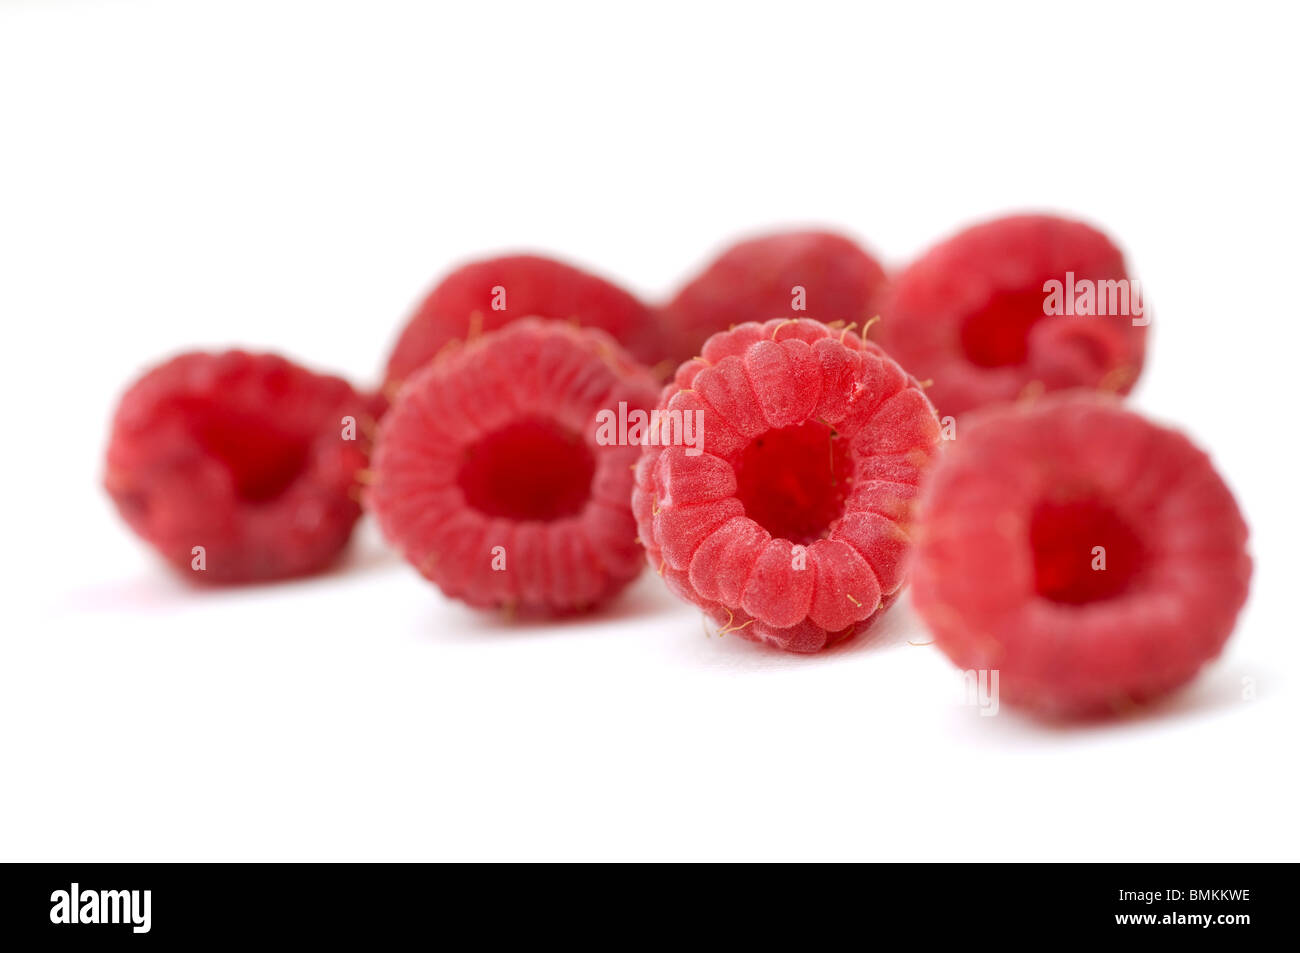 Red Raspberries Isolated on White Background. Stock Photo